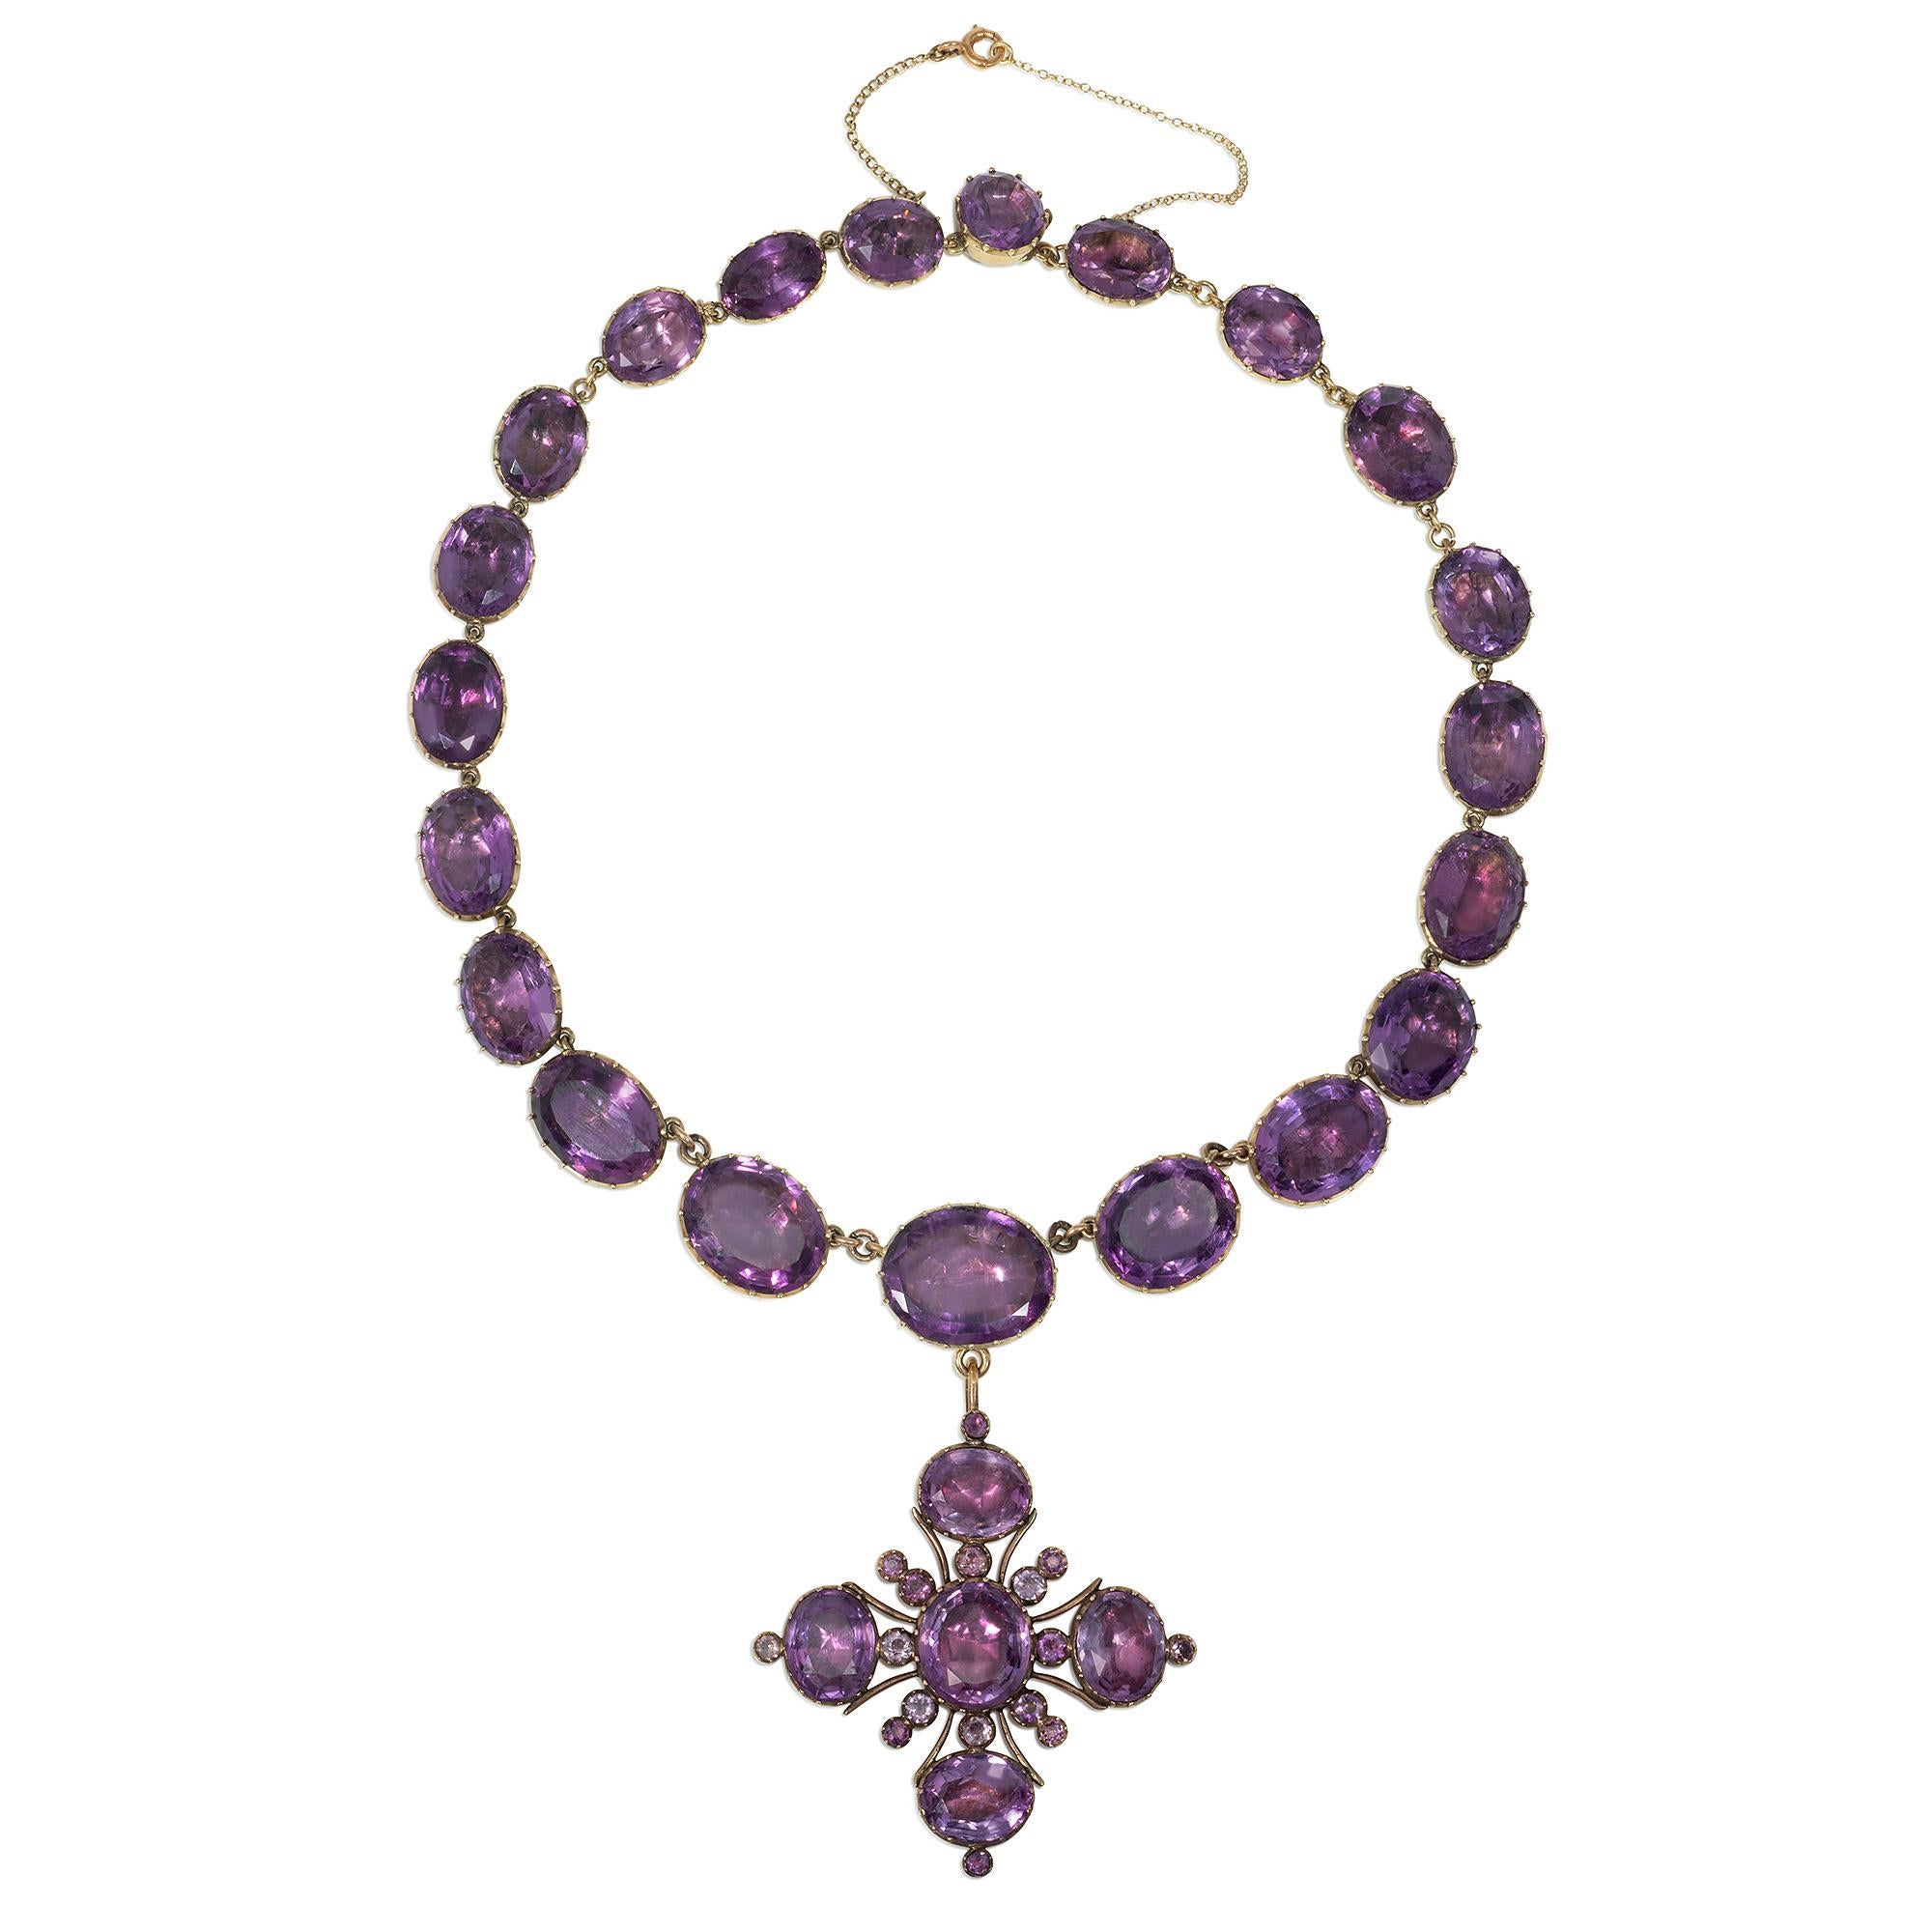 An antique Georgian period amethyst rivière necklace comprising graduated oval foil-backed amethysts, suspending a detachable gold and amethyst maltese cross pendant, in 14k.

Dimensions: necklace 15